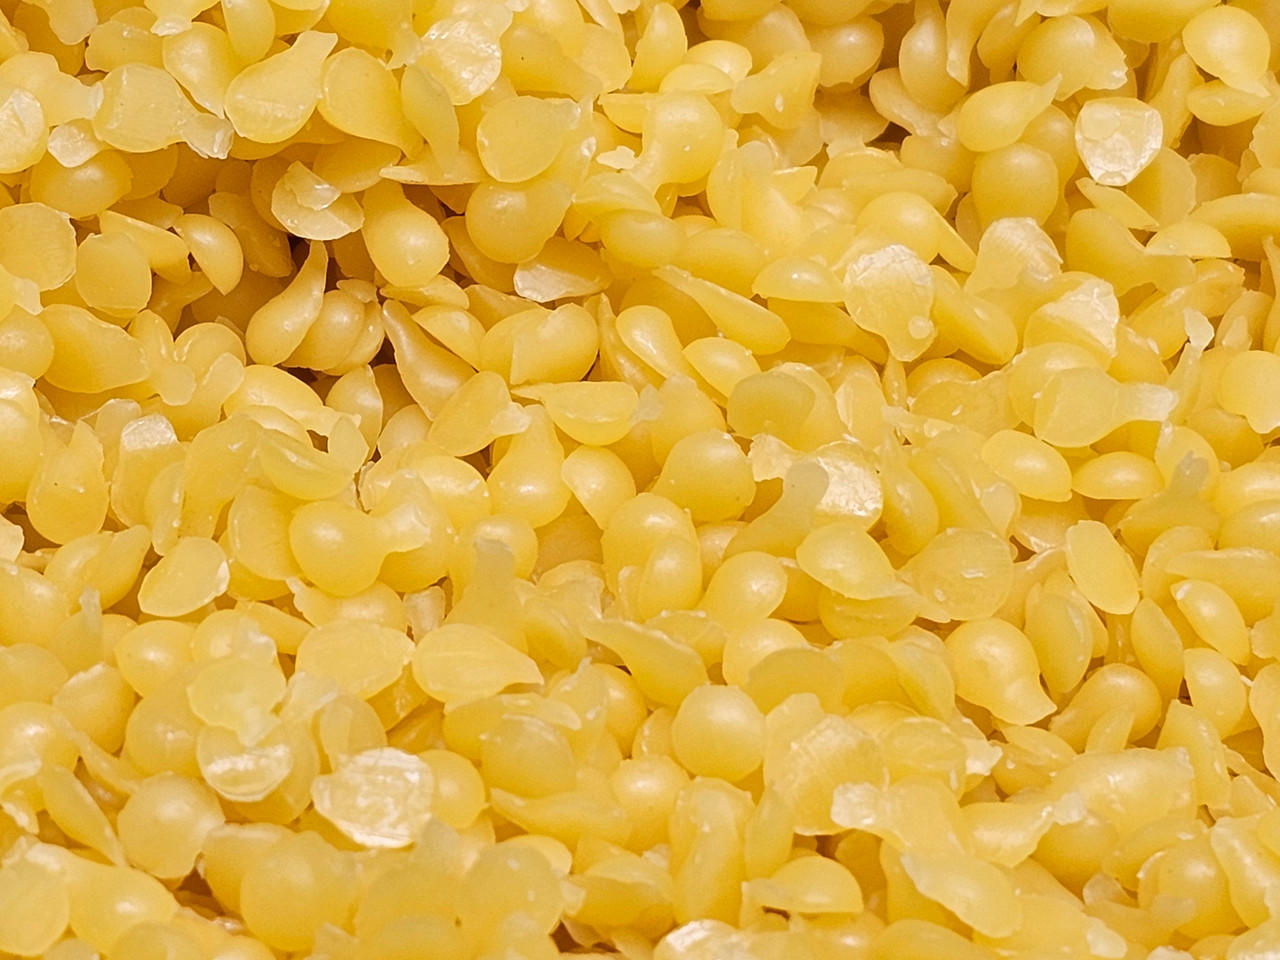 Hyoola Yellow Beeswax Pellets - 100% Natural - Premium Cosmetic Grade -  Pure Beeswax Pellets - 5 Pound - Triple Filtered Easy Melt Bees Wax  Pastilles